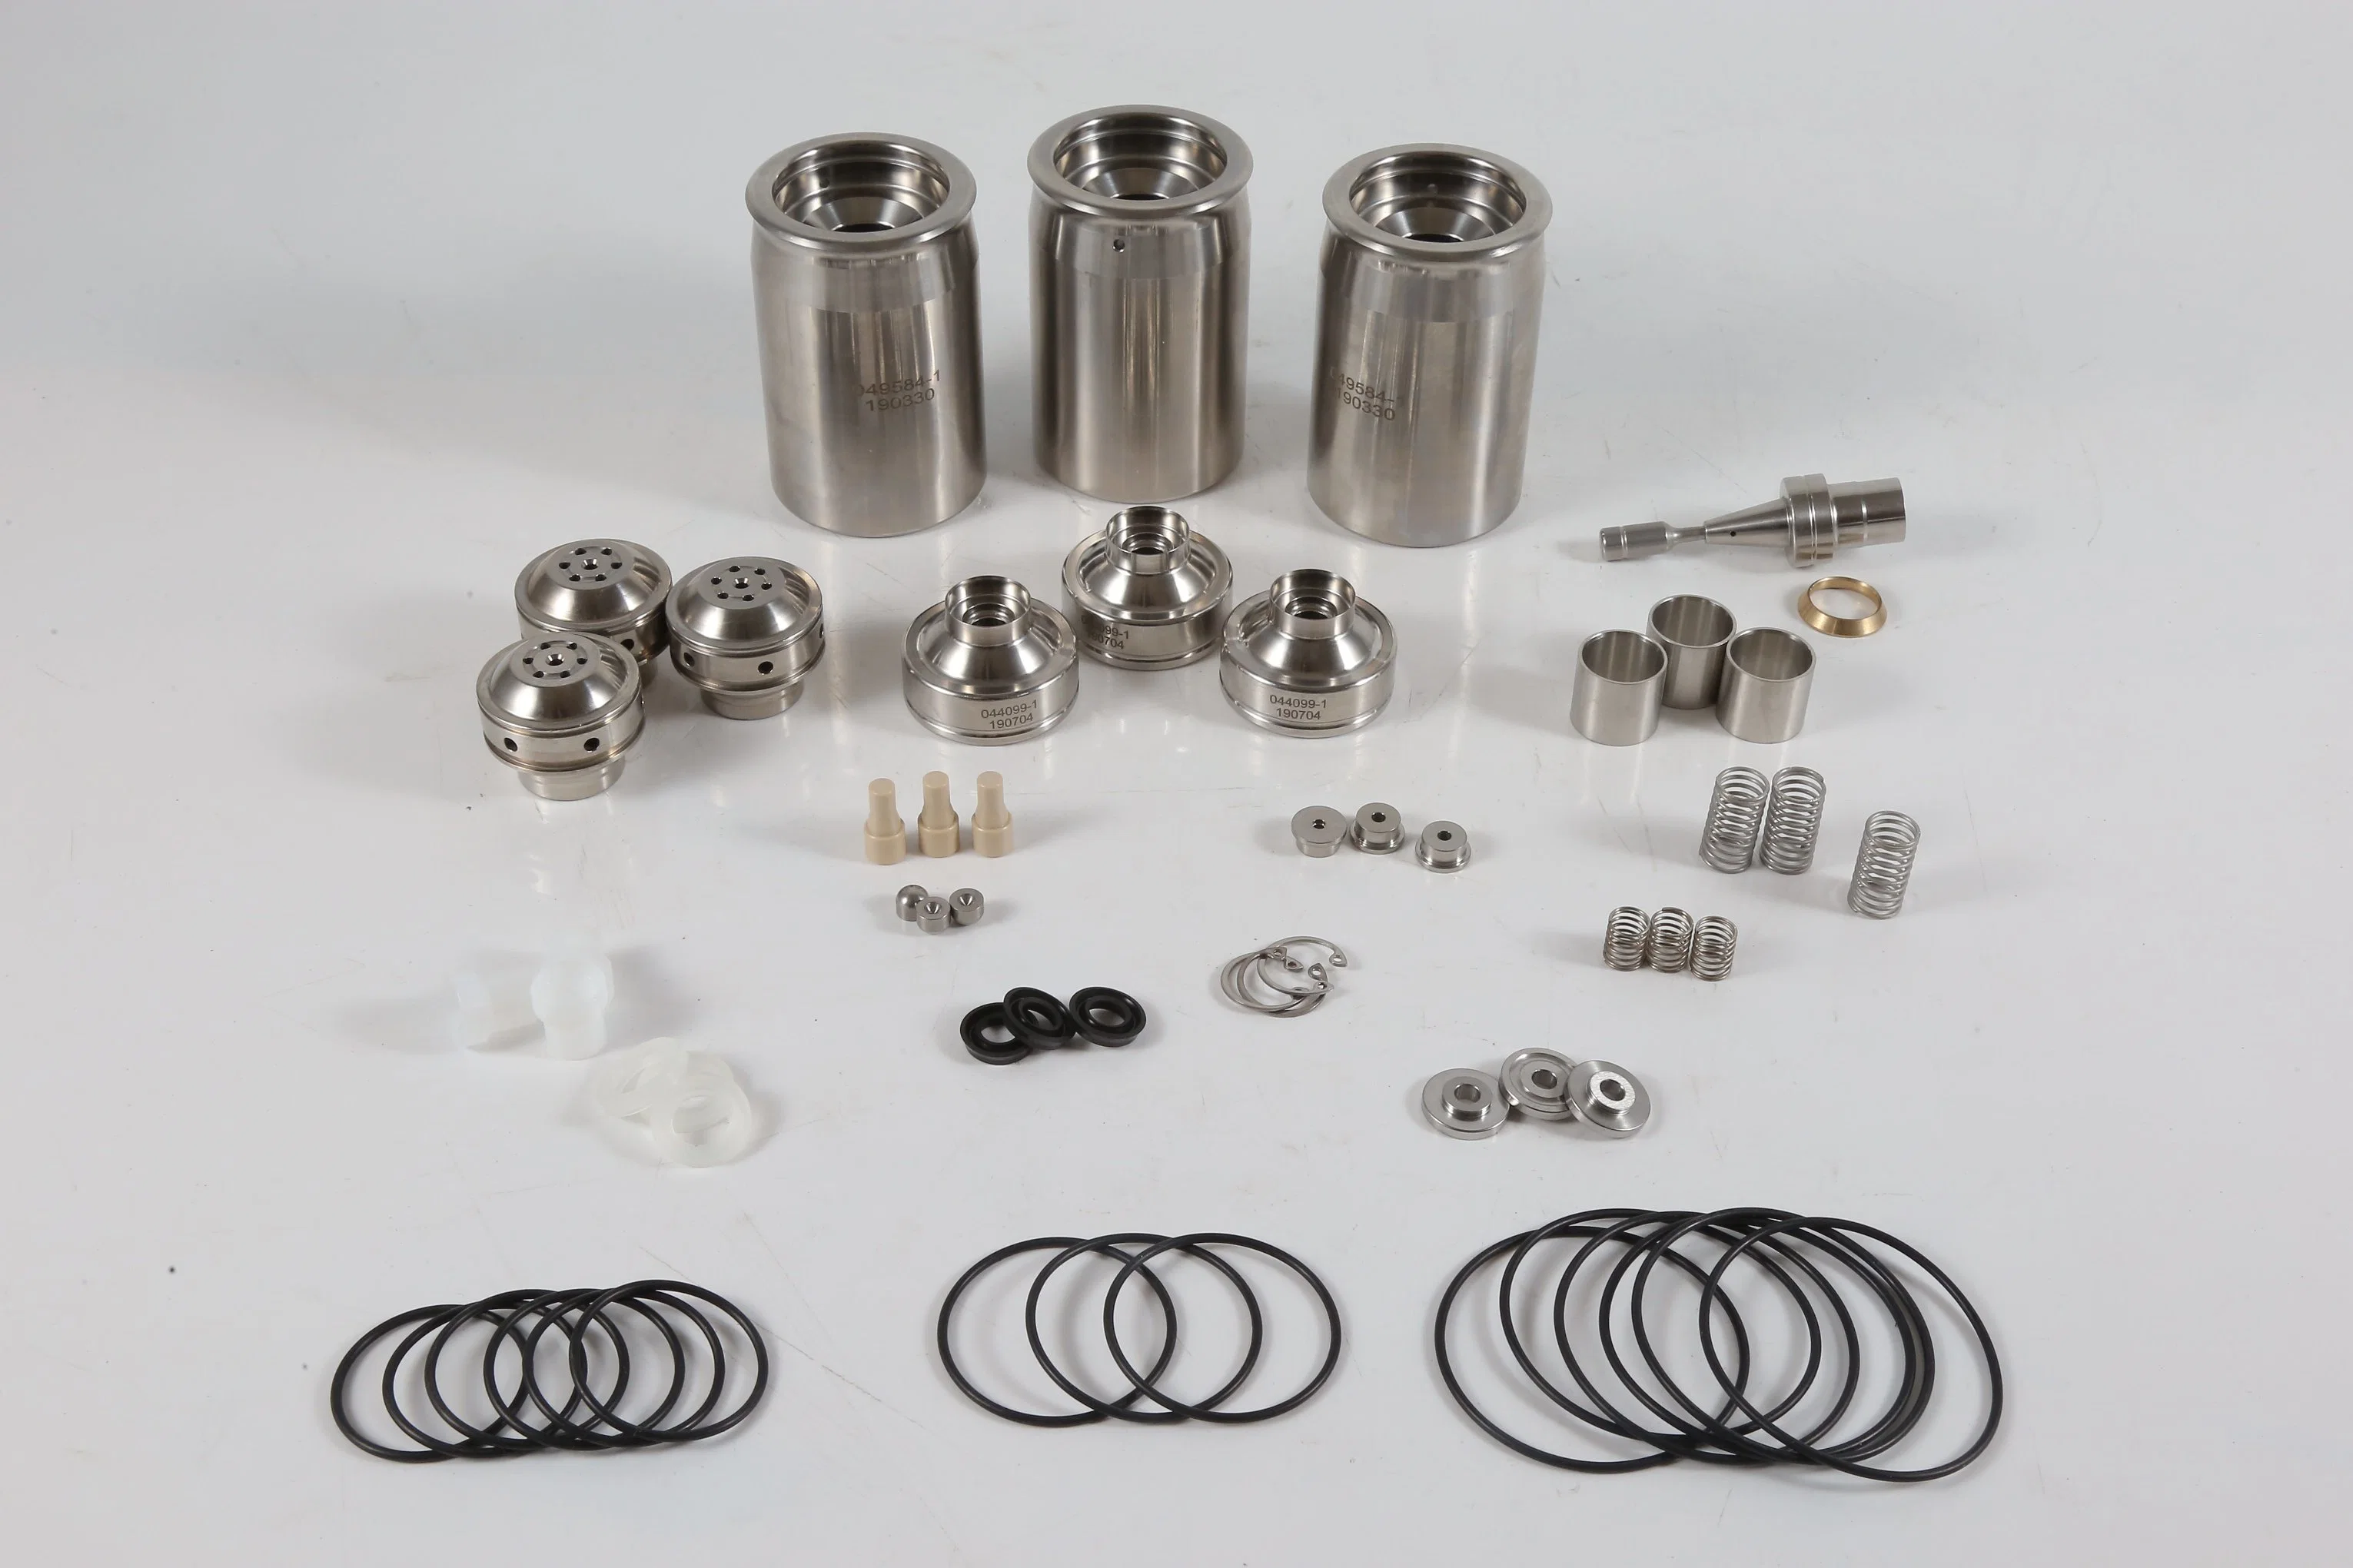 Waterjet Spare Parts Major Repair Kit 050624-2 with High Pressure Cylinder of Water Jet Cutter Direct Drive Pump